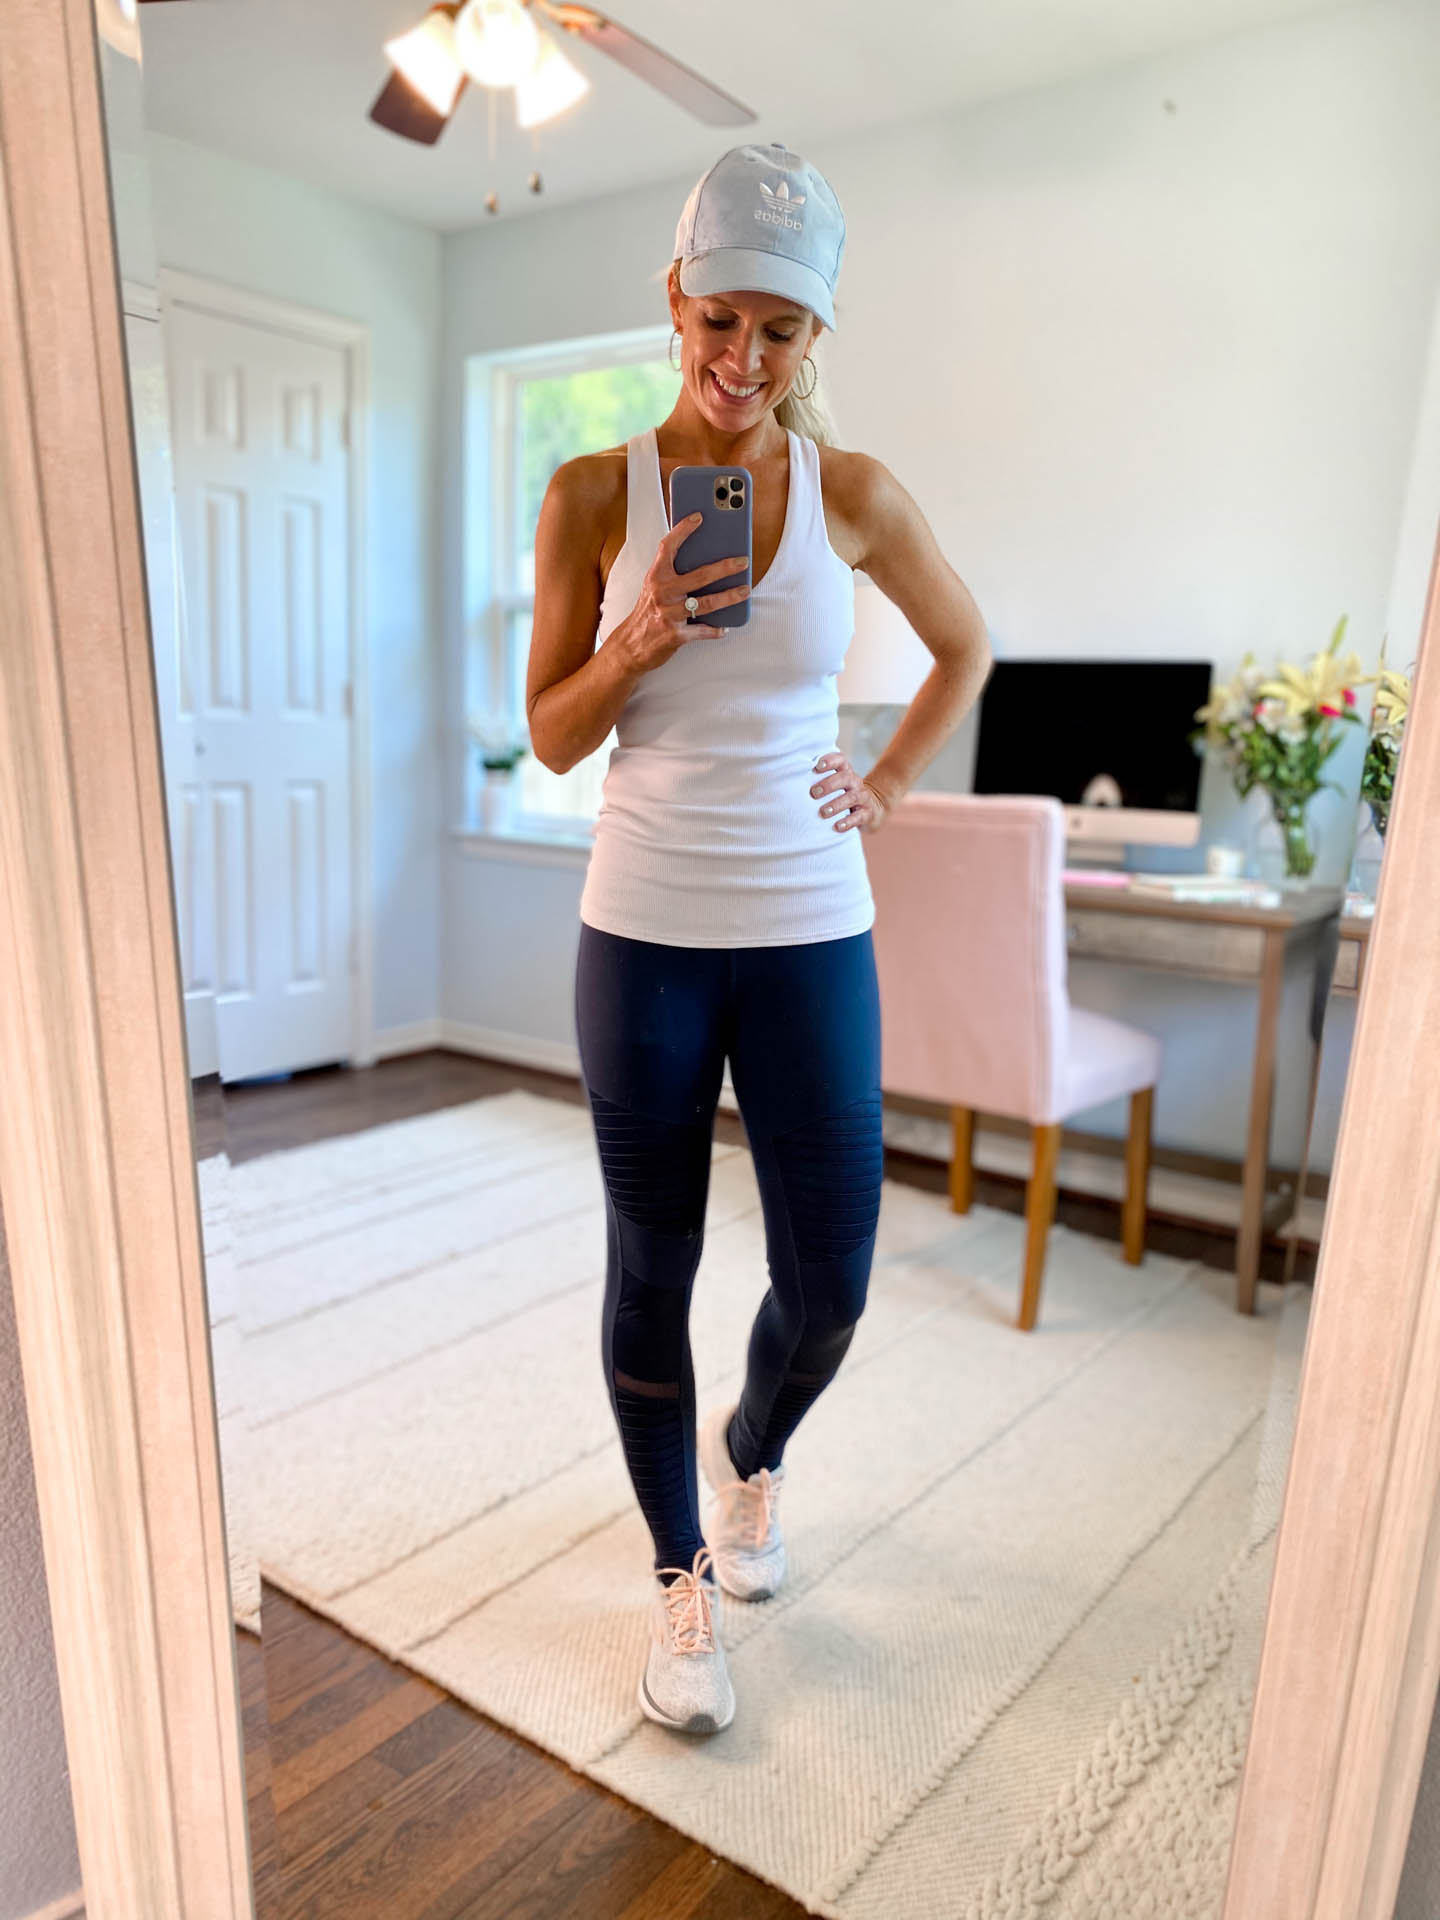 Round-up of Nordstrom Anniversary Sale finds! Fall outfits, athleisure, athletic outfits | Nordstrom Anniversary Sale Guide